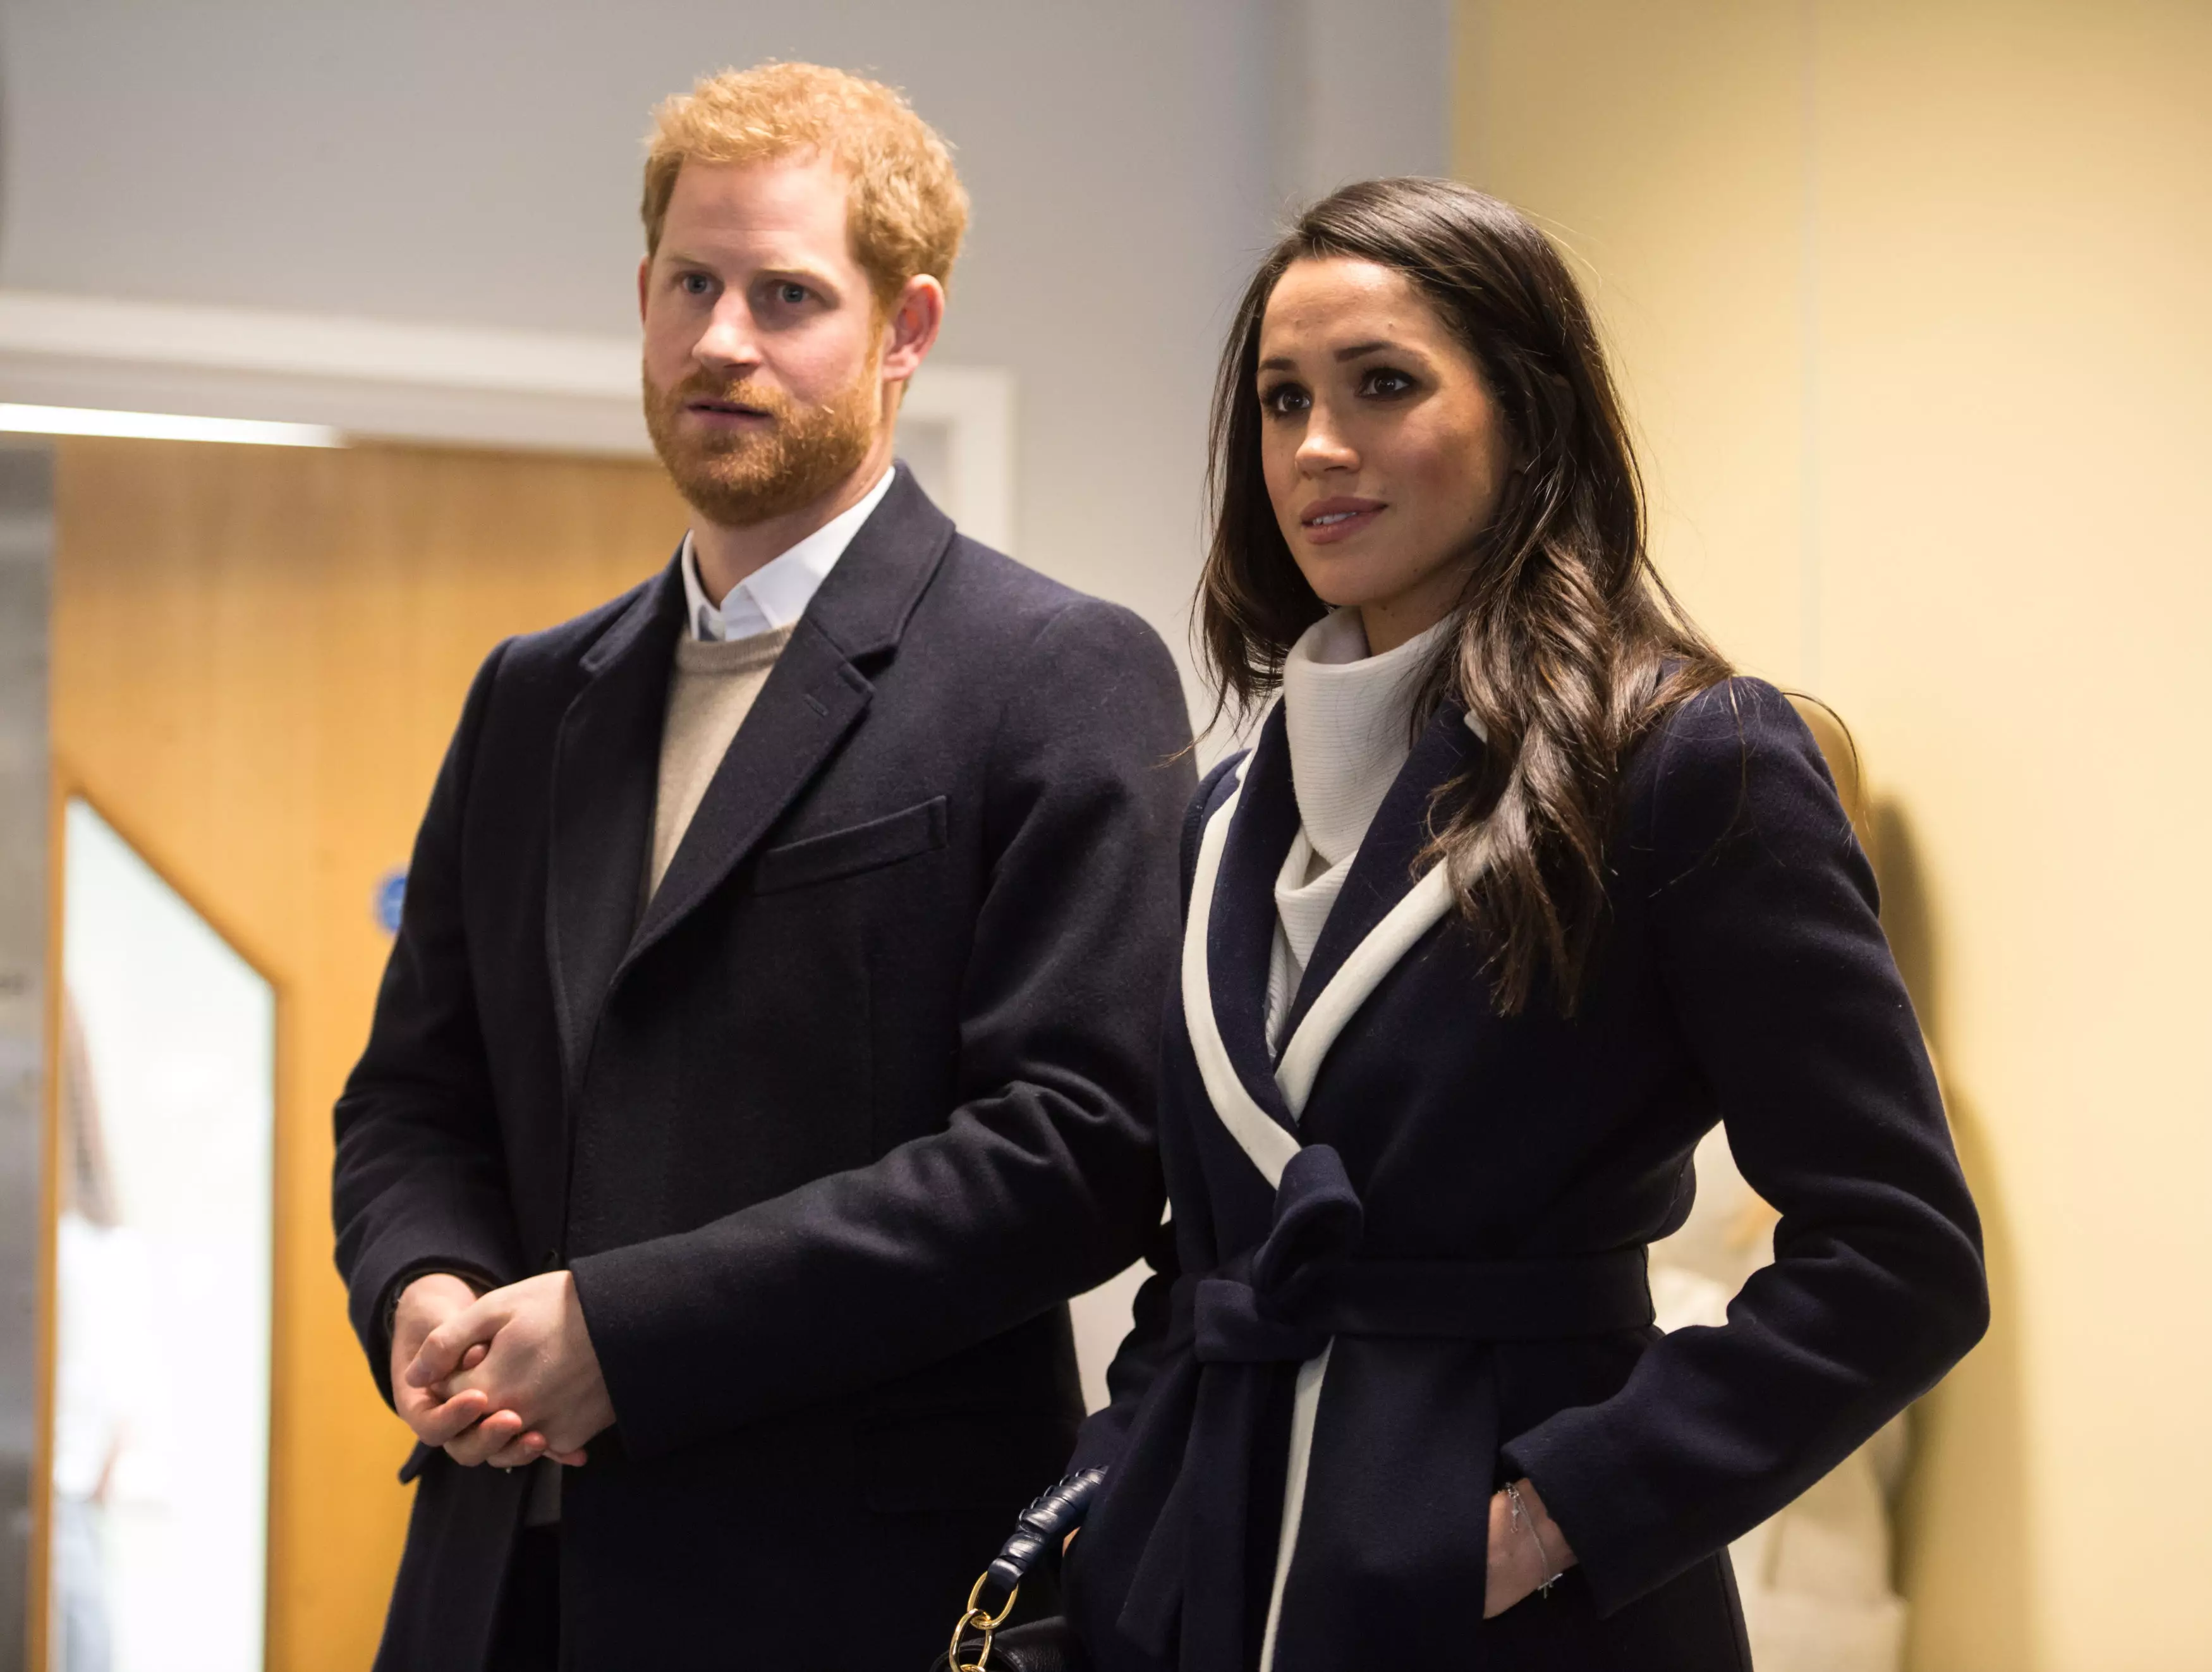 Prince Harry and Meghan Markle will not appear in the show either, Morgan confirmed (